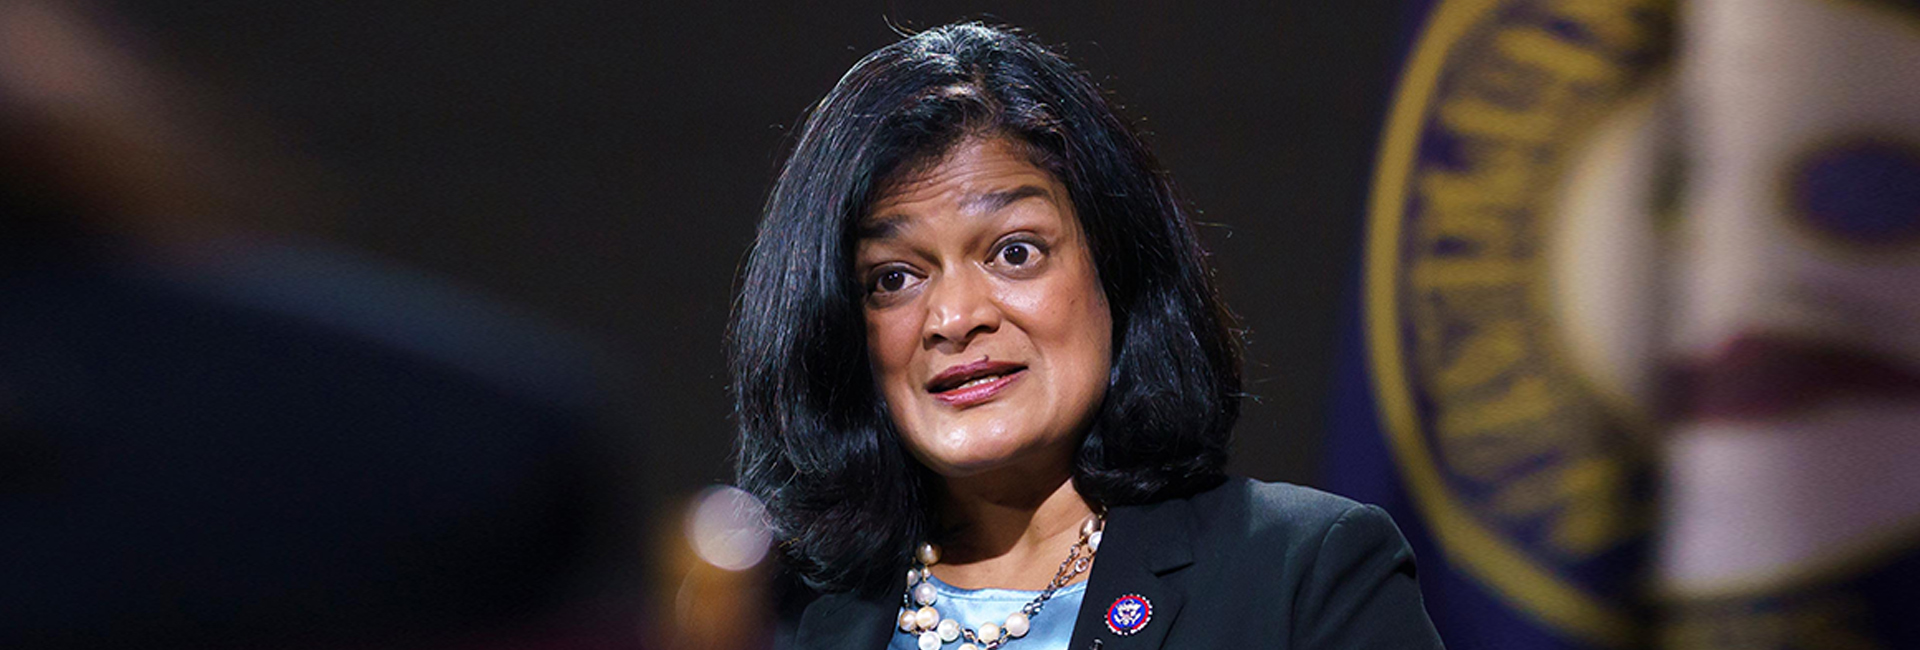 Pramila Jayapal: Indian-American becomes the first Asian woman elected to the US House of Representatives